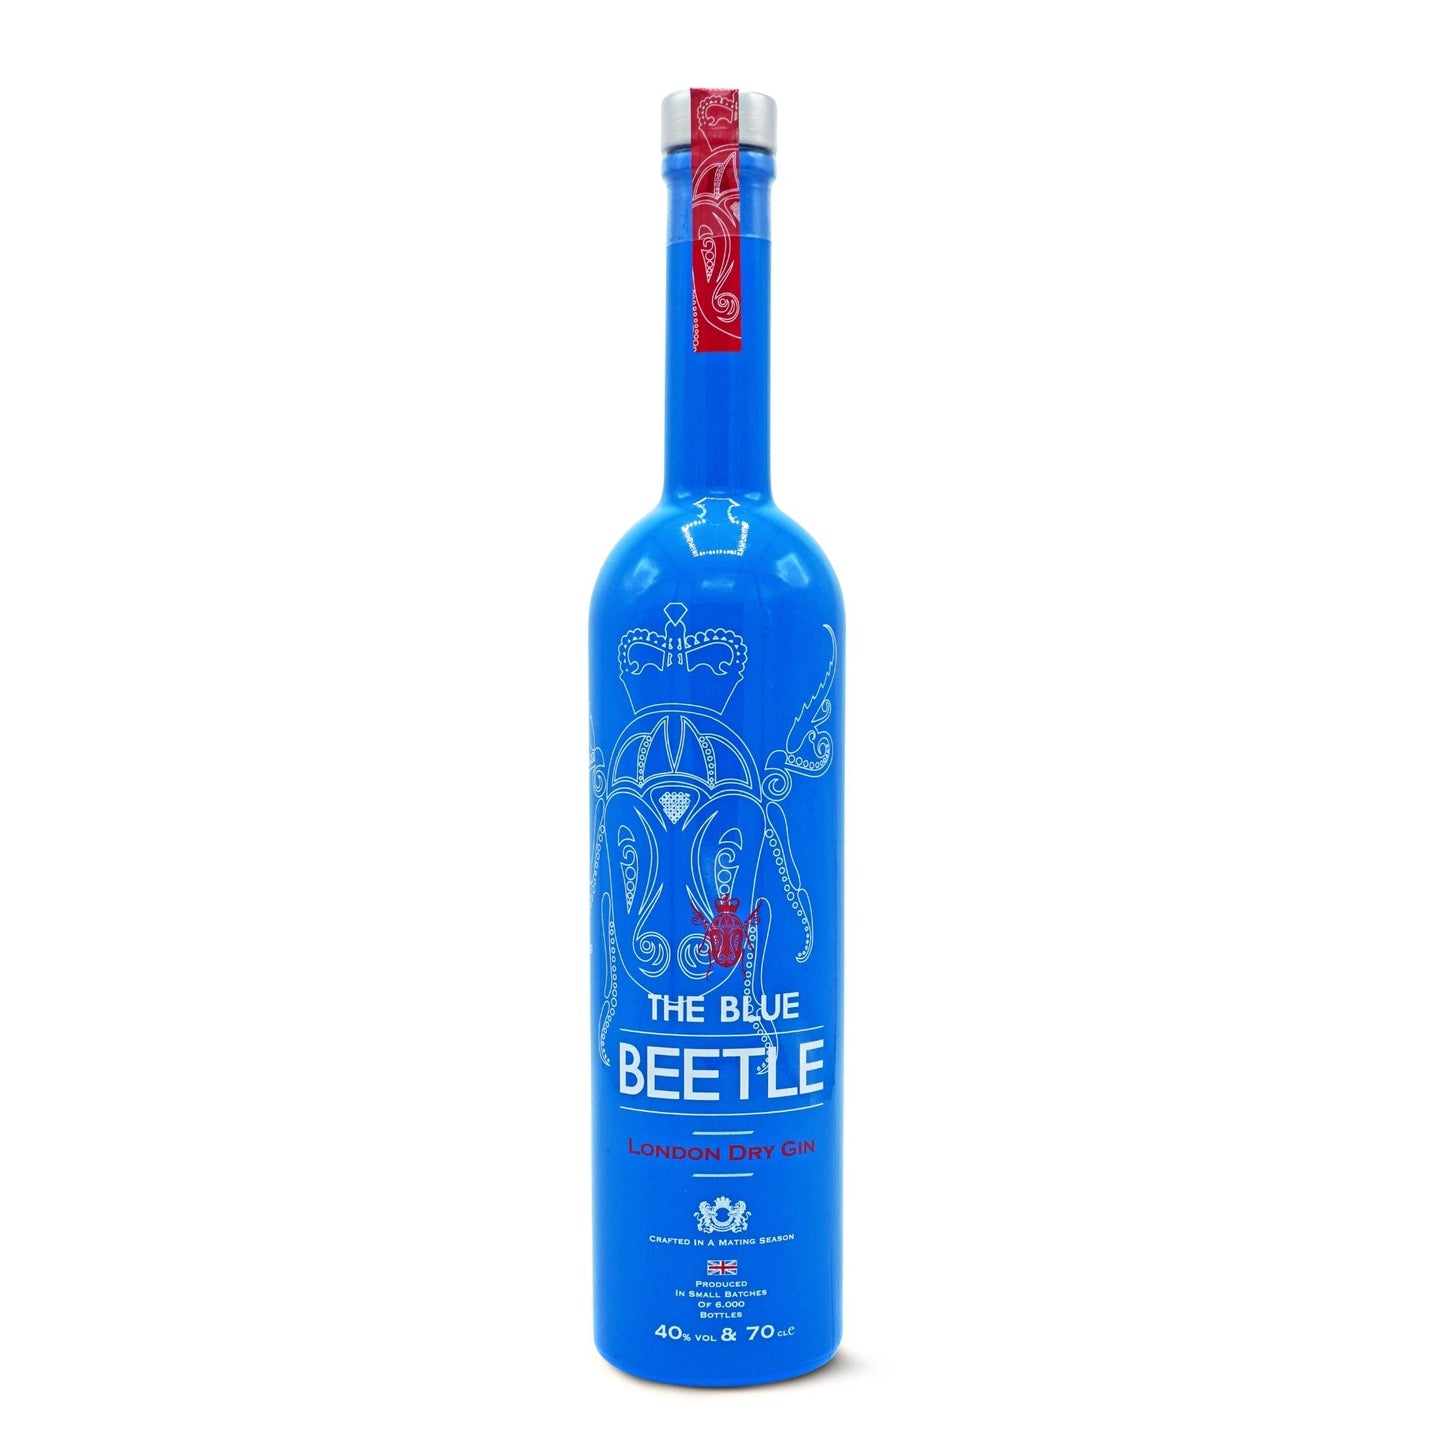 THE BLUE BEETLE LONDON DRY GIN 0.7LT